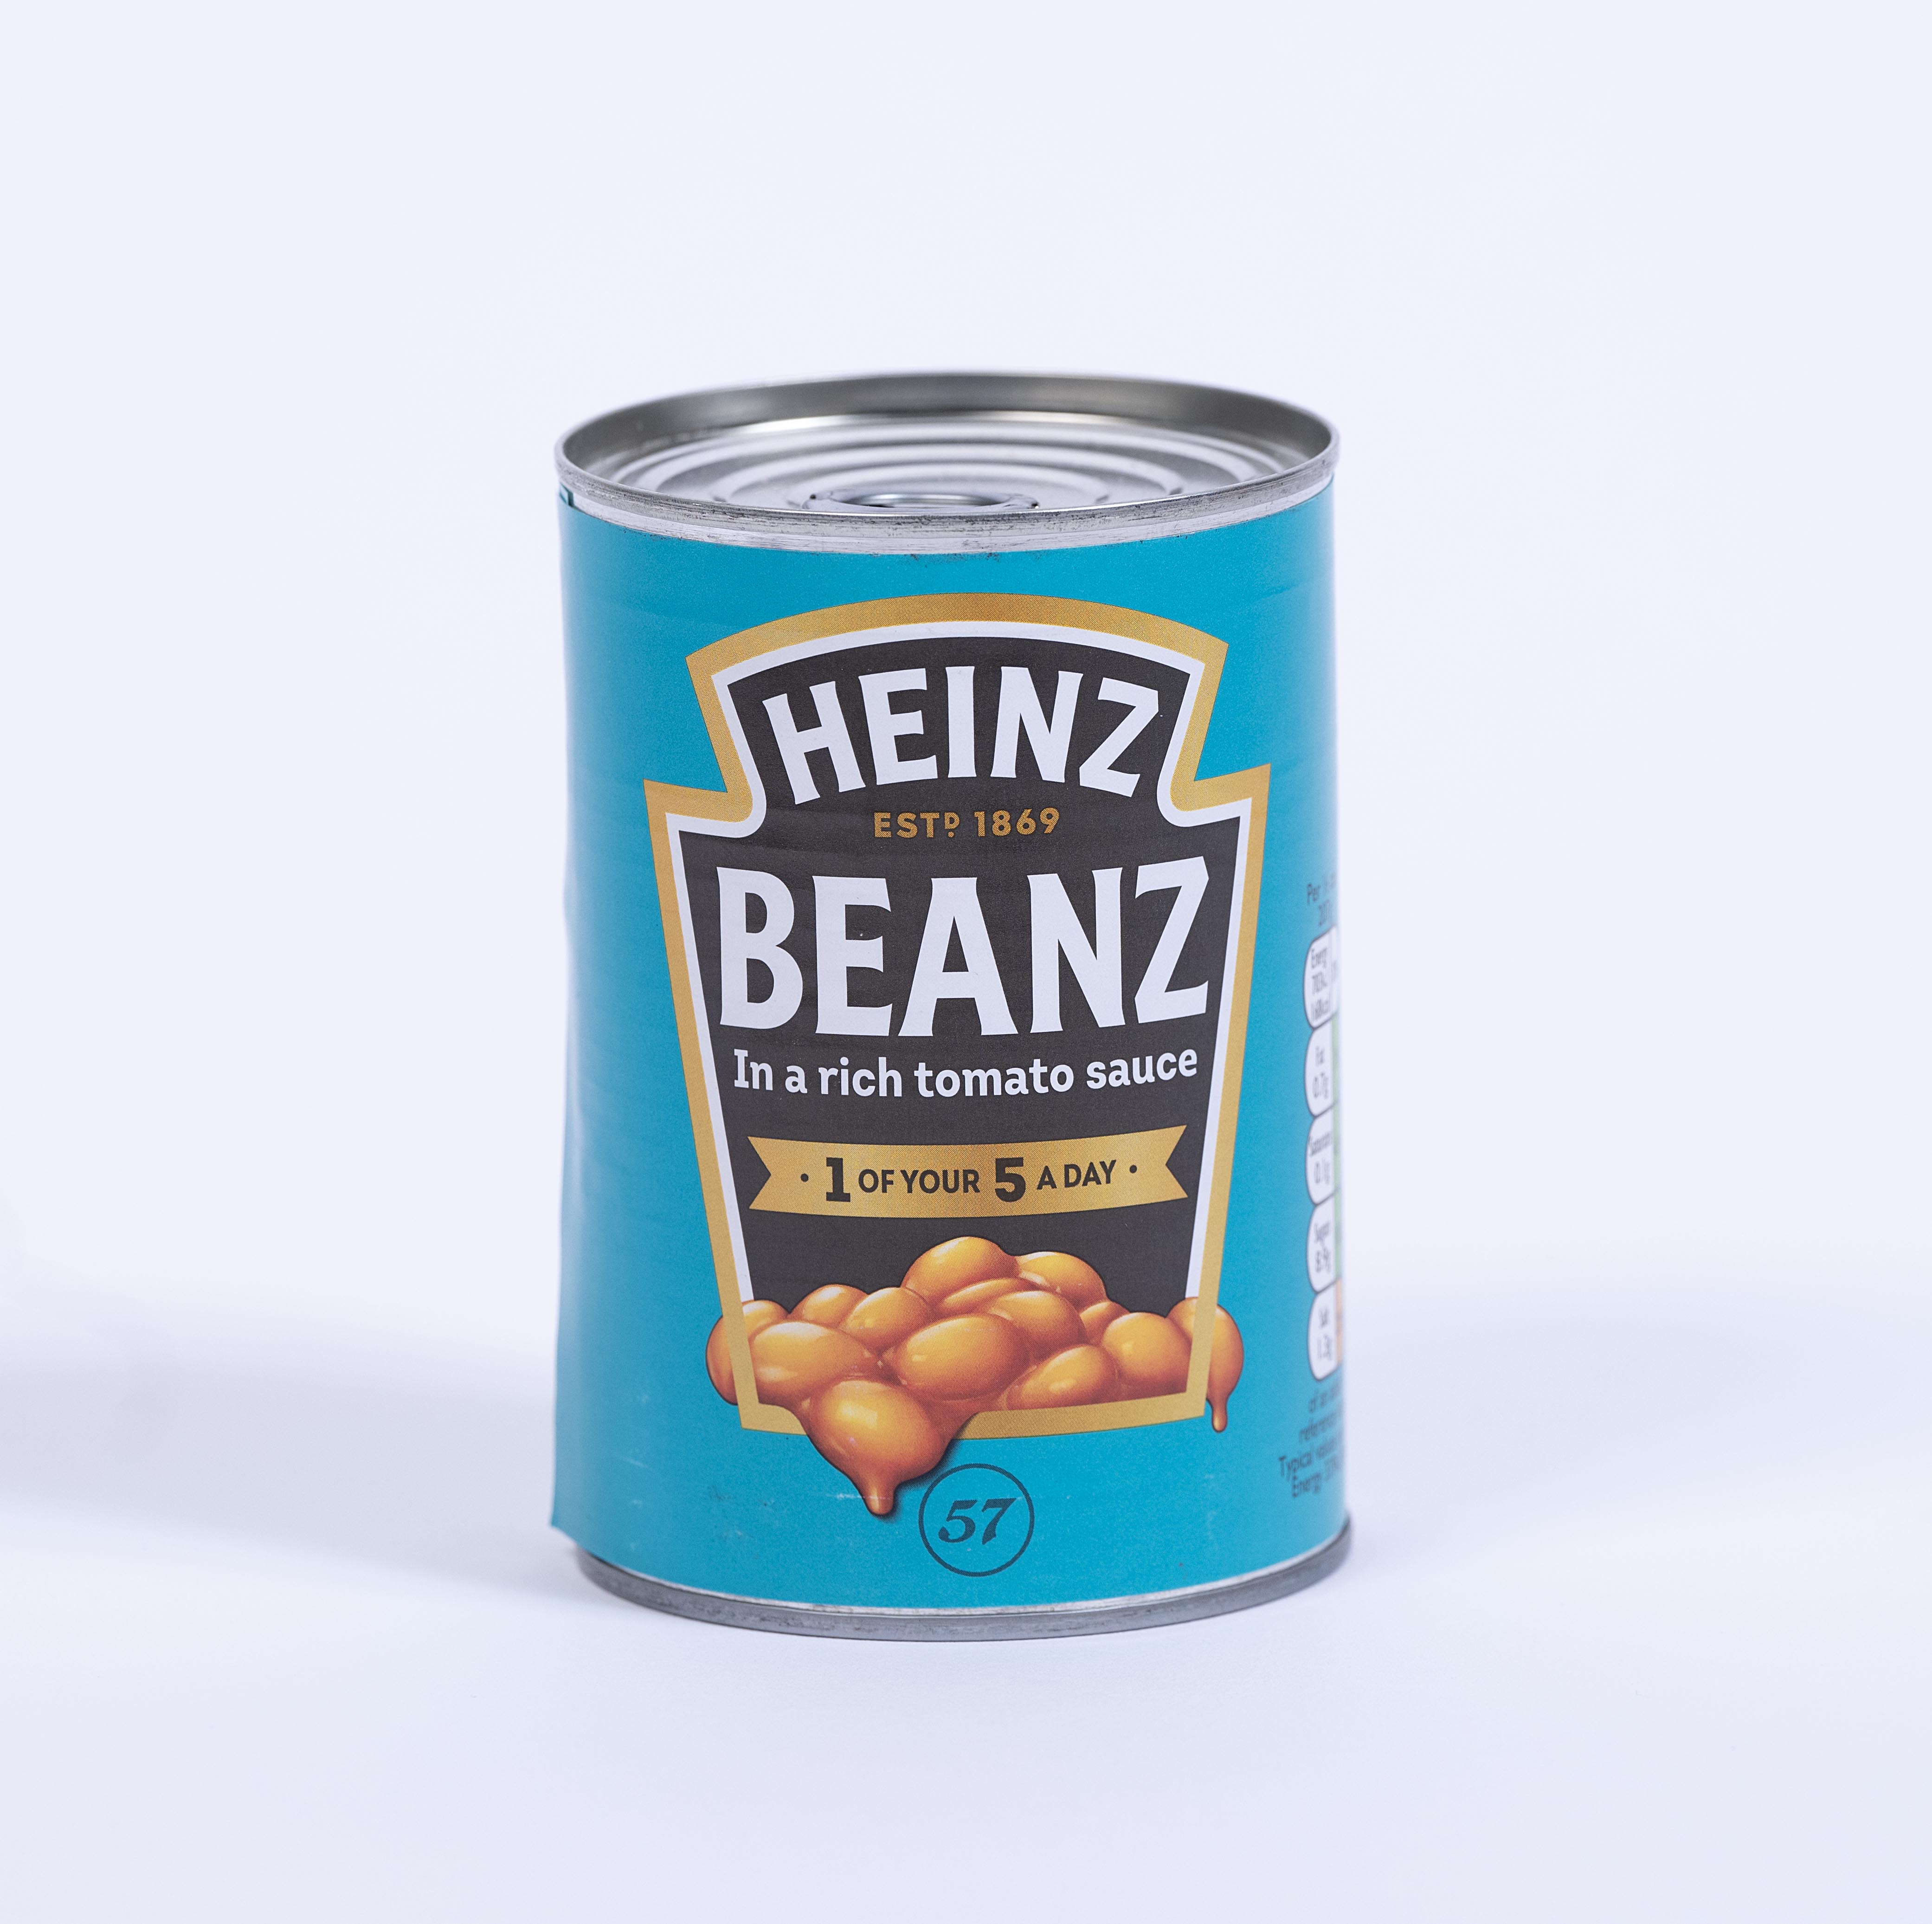 Baked Beanz are a favourite of Brits selling 2.5million cans every day